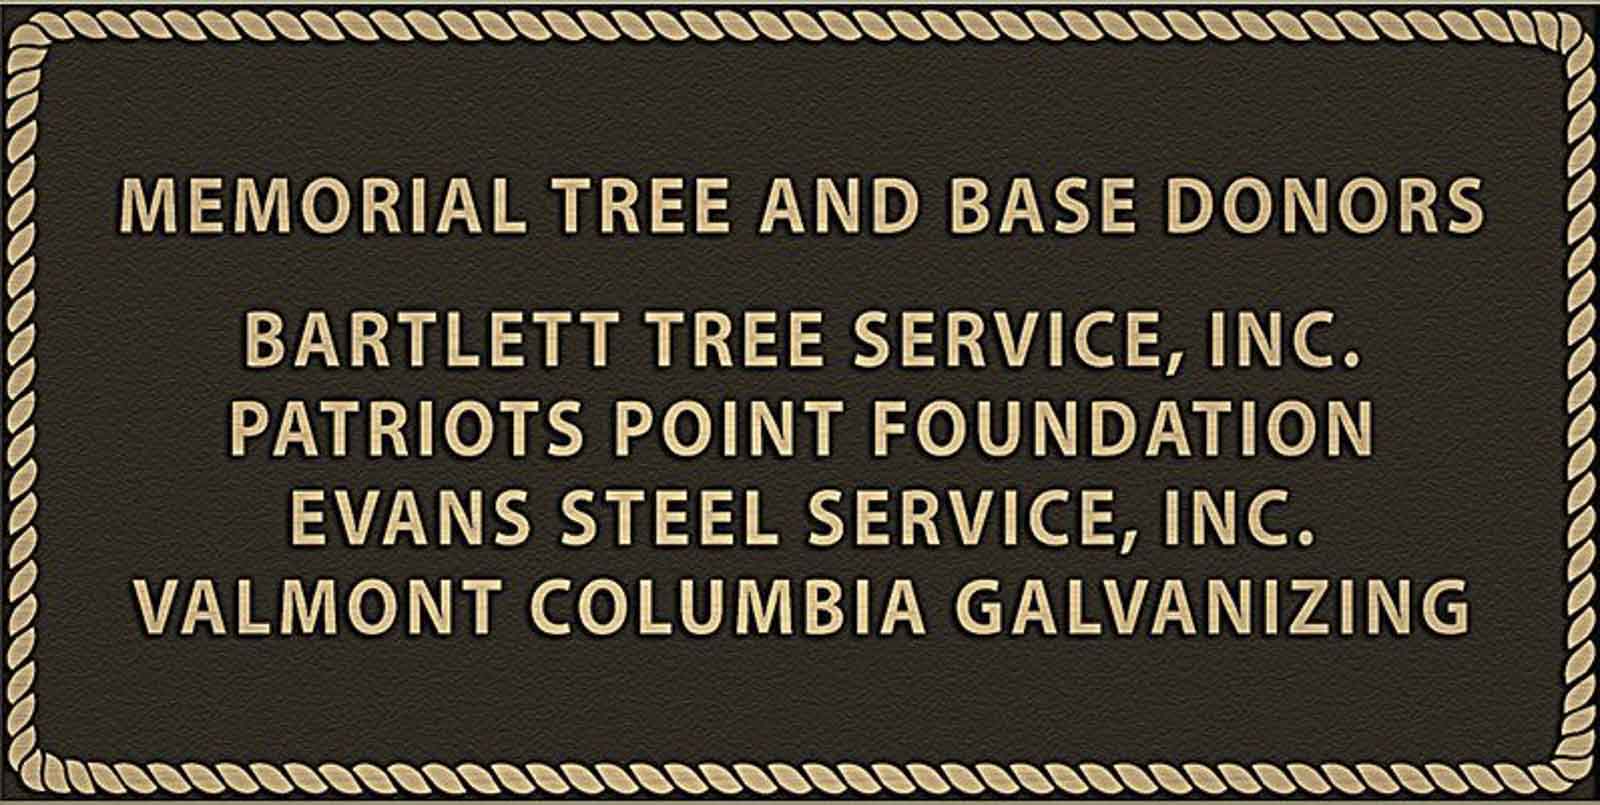 Memorial Tree And Base Donors - Patriots Point Foundation